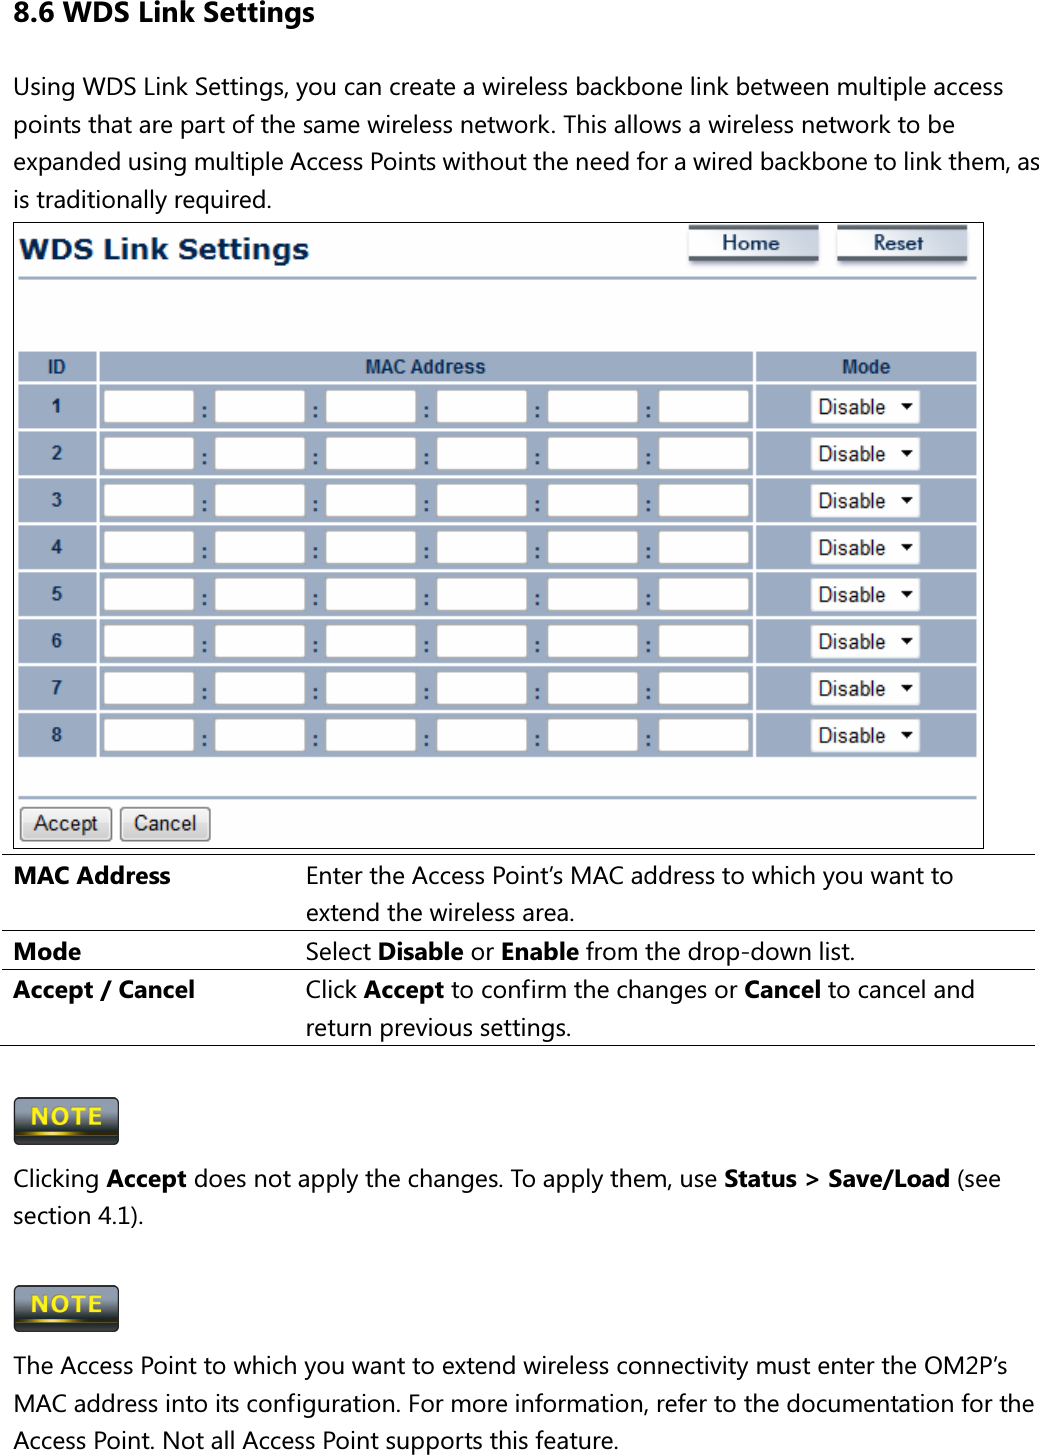 8.6 WDS Link Settings Using WDS Link Settings, you can create a wireless backbone link between multiple access points that are part of the same wireless network. This allows a wireless network to be expanded using multiple Access Points without the need for a wired backbone to link them, as is traditionally required.  MAC Address  Enter the Access Point’s MAC address to which you want to extend the wireless area. Mode  Select Disable or Enable from the drop-down list. Accept / Cancel  Click Accept to confirm the changes or Cancel to cancel and return previous settings.   Clicking Accept does not apply the changes. To apply them, use Status &gt; Save/Load (see section 4.1).   The Access Point to which you want to extend wireless connectivity must enter the OM2P’s MAC address into its configuration. For more information, refer to the documentation for the Access Point. Not all Access Point supports this feature.  